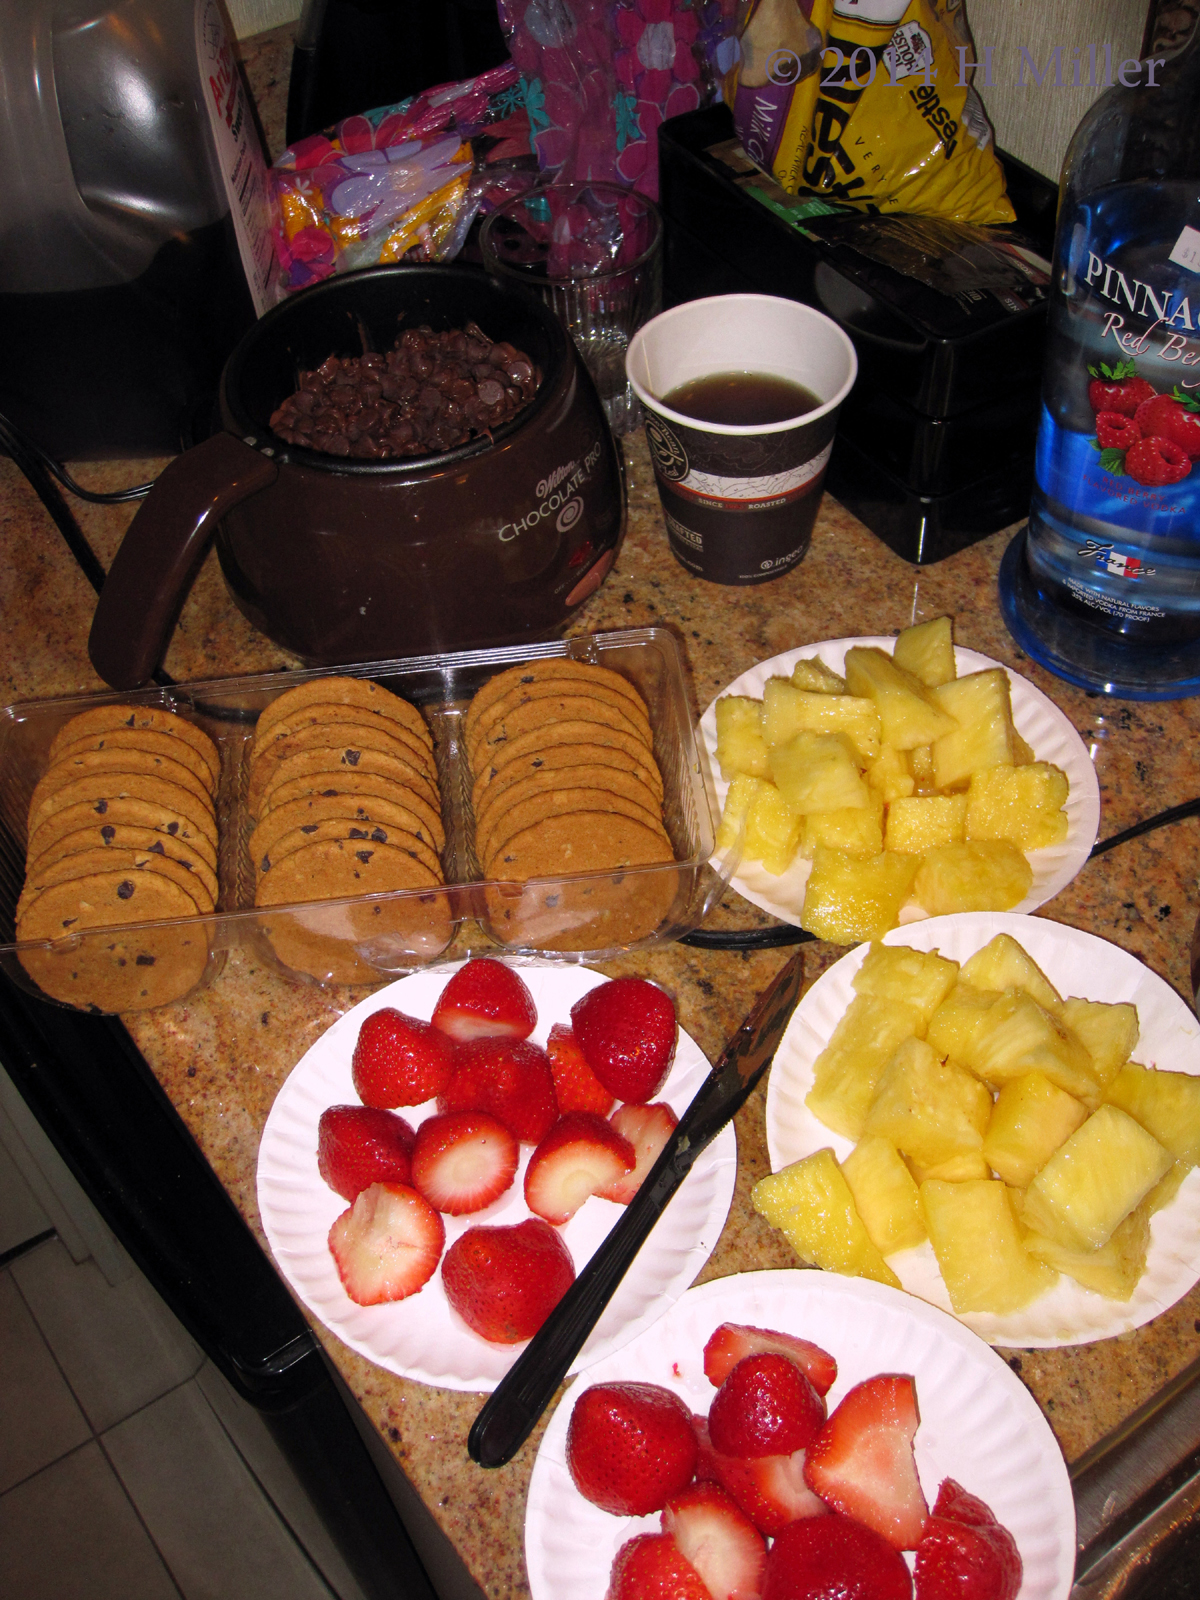 The Chocolate Is Melting, And The Strawberries, Pineapples ,And Cookies Are Ready To Eat!